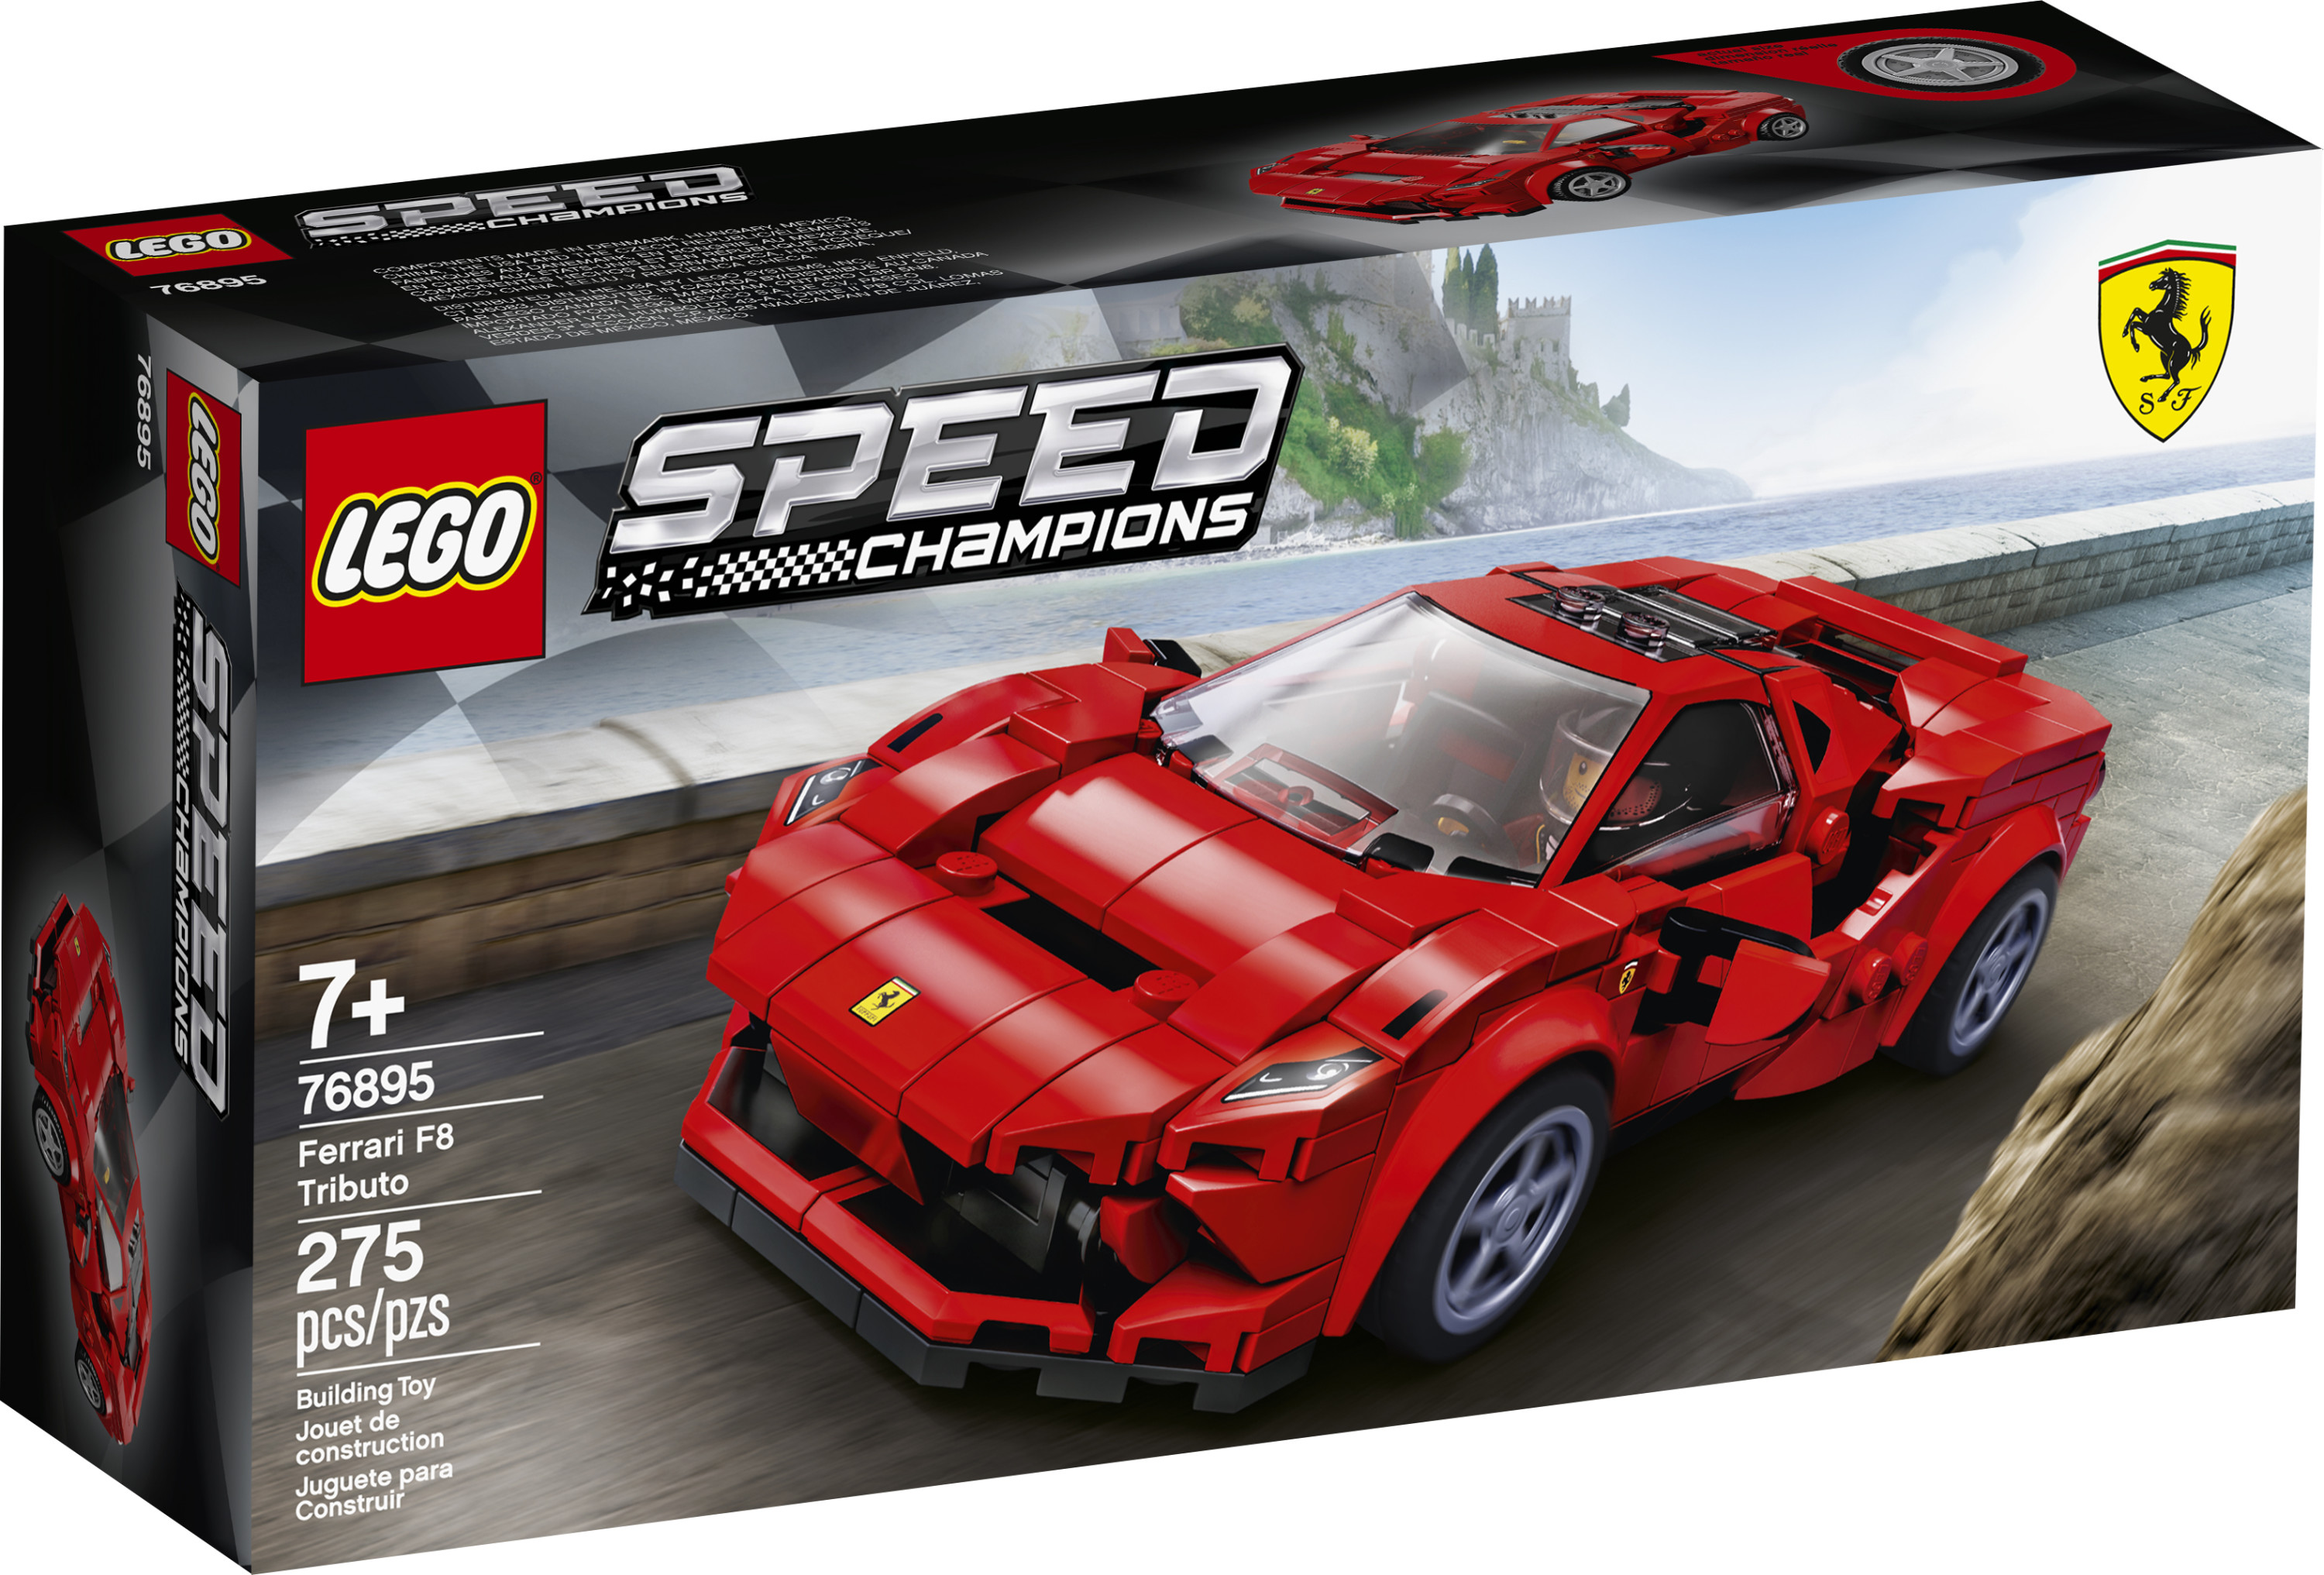 LEGO Speed Champions 76895 Ferrari F8 Tributo Racing Model Car, Vehicle Building Car (275 pieces) - image 4 of 12